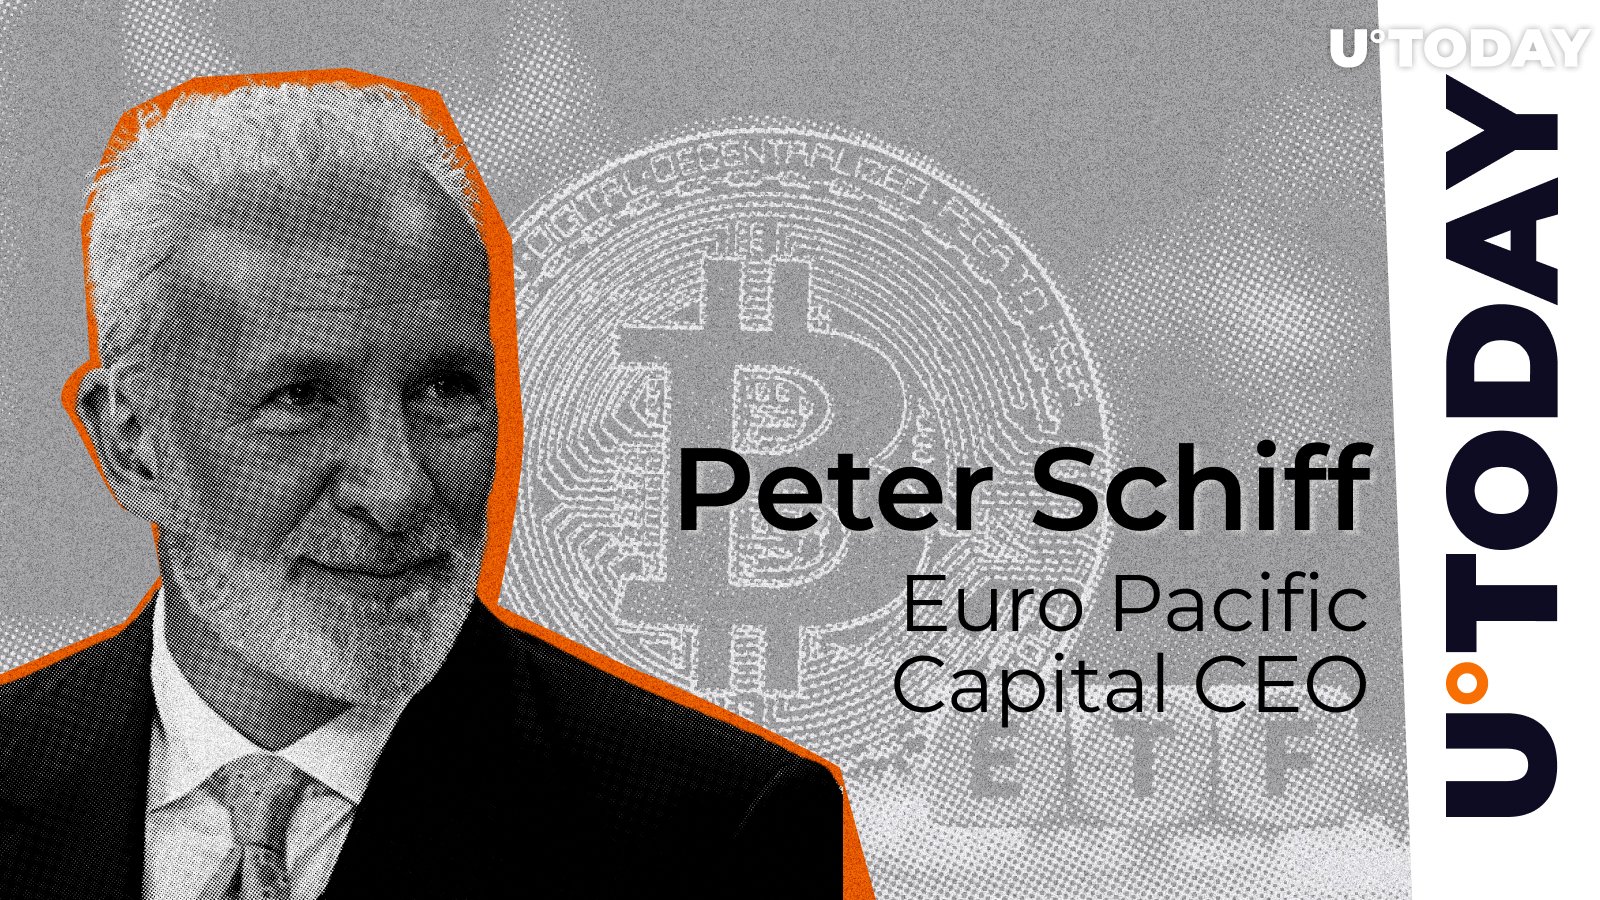 'Wait Until Stock Market Opens': Peter Schiff Gives Rare Bitcoin ETF Advice